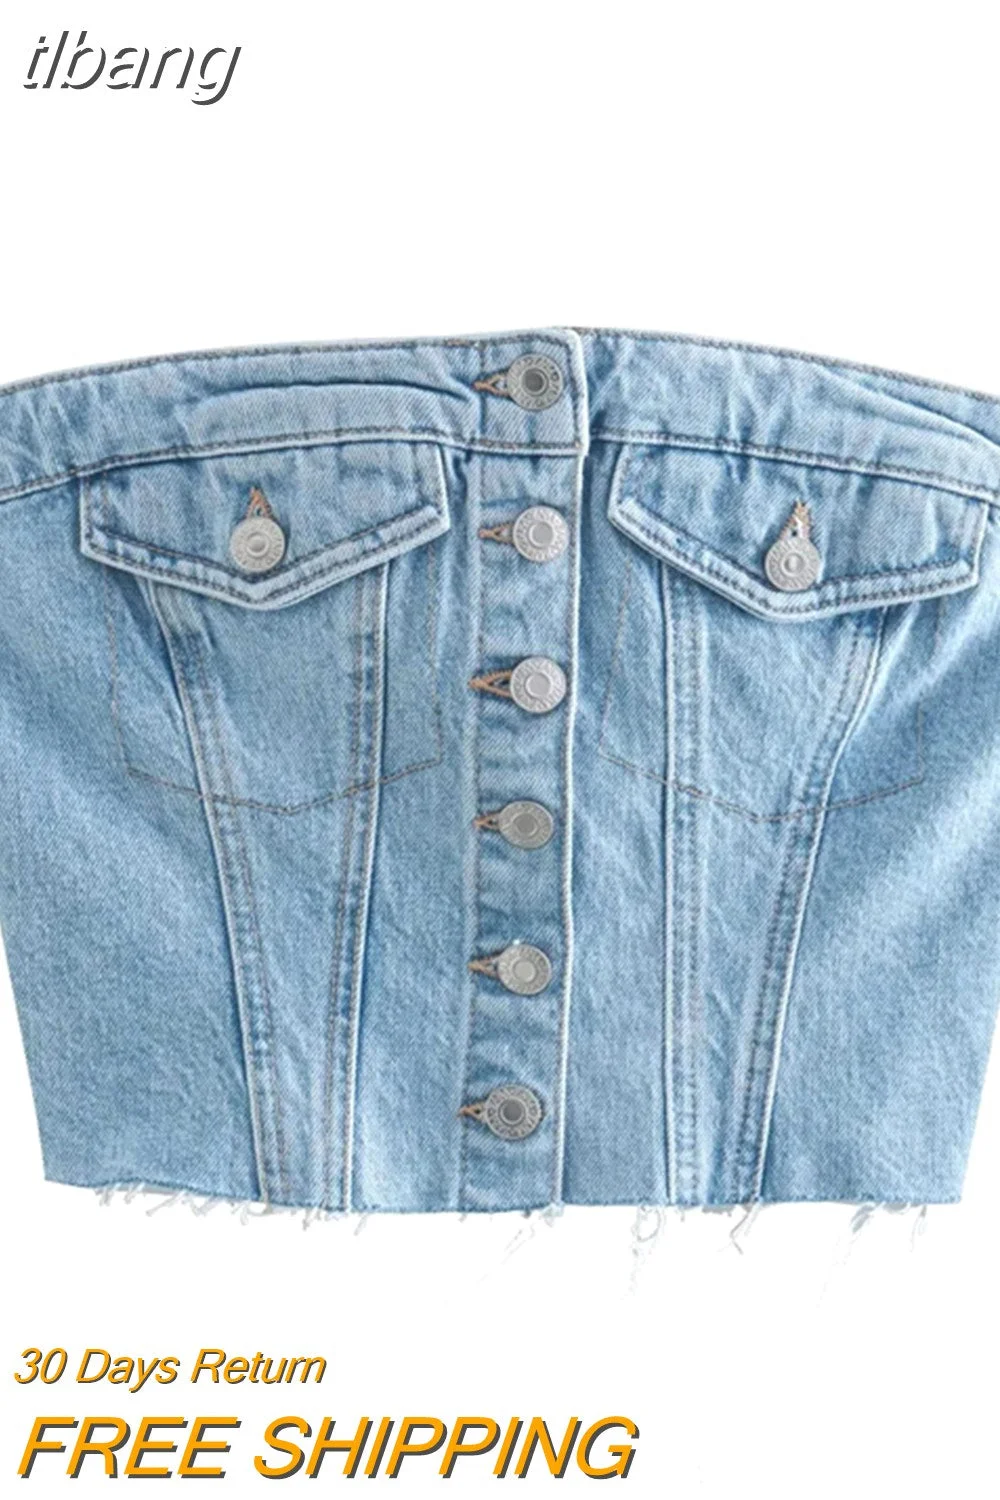 tlbang Denim Crop Tops for Women Button Down Strapless Sleeveless Elastic Waist Vest y2k 2000s Clothes Jeans Shirt Streetwear